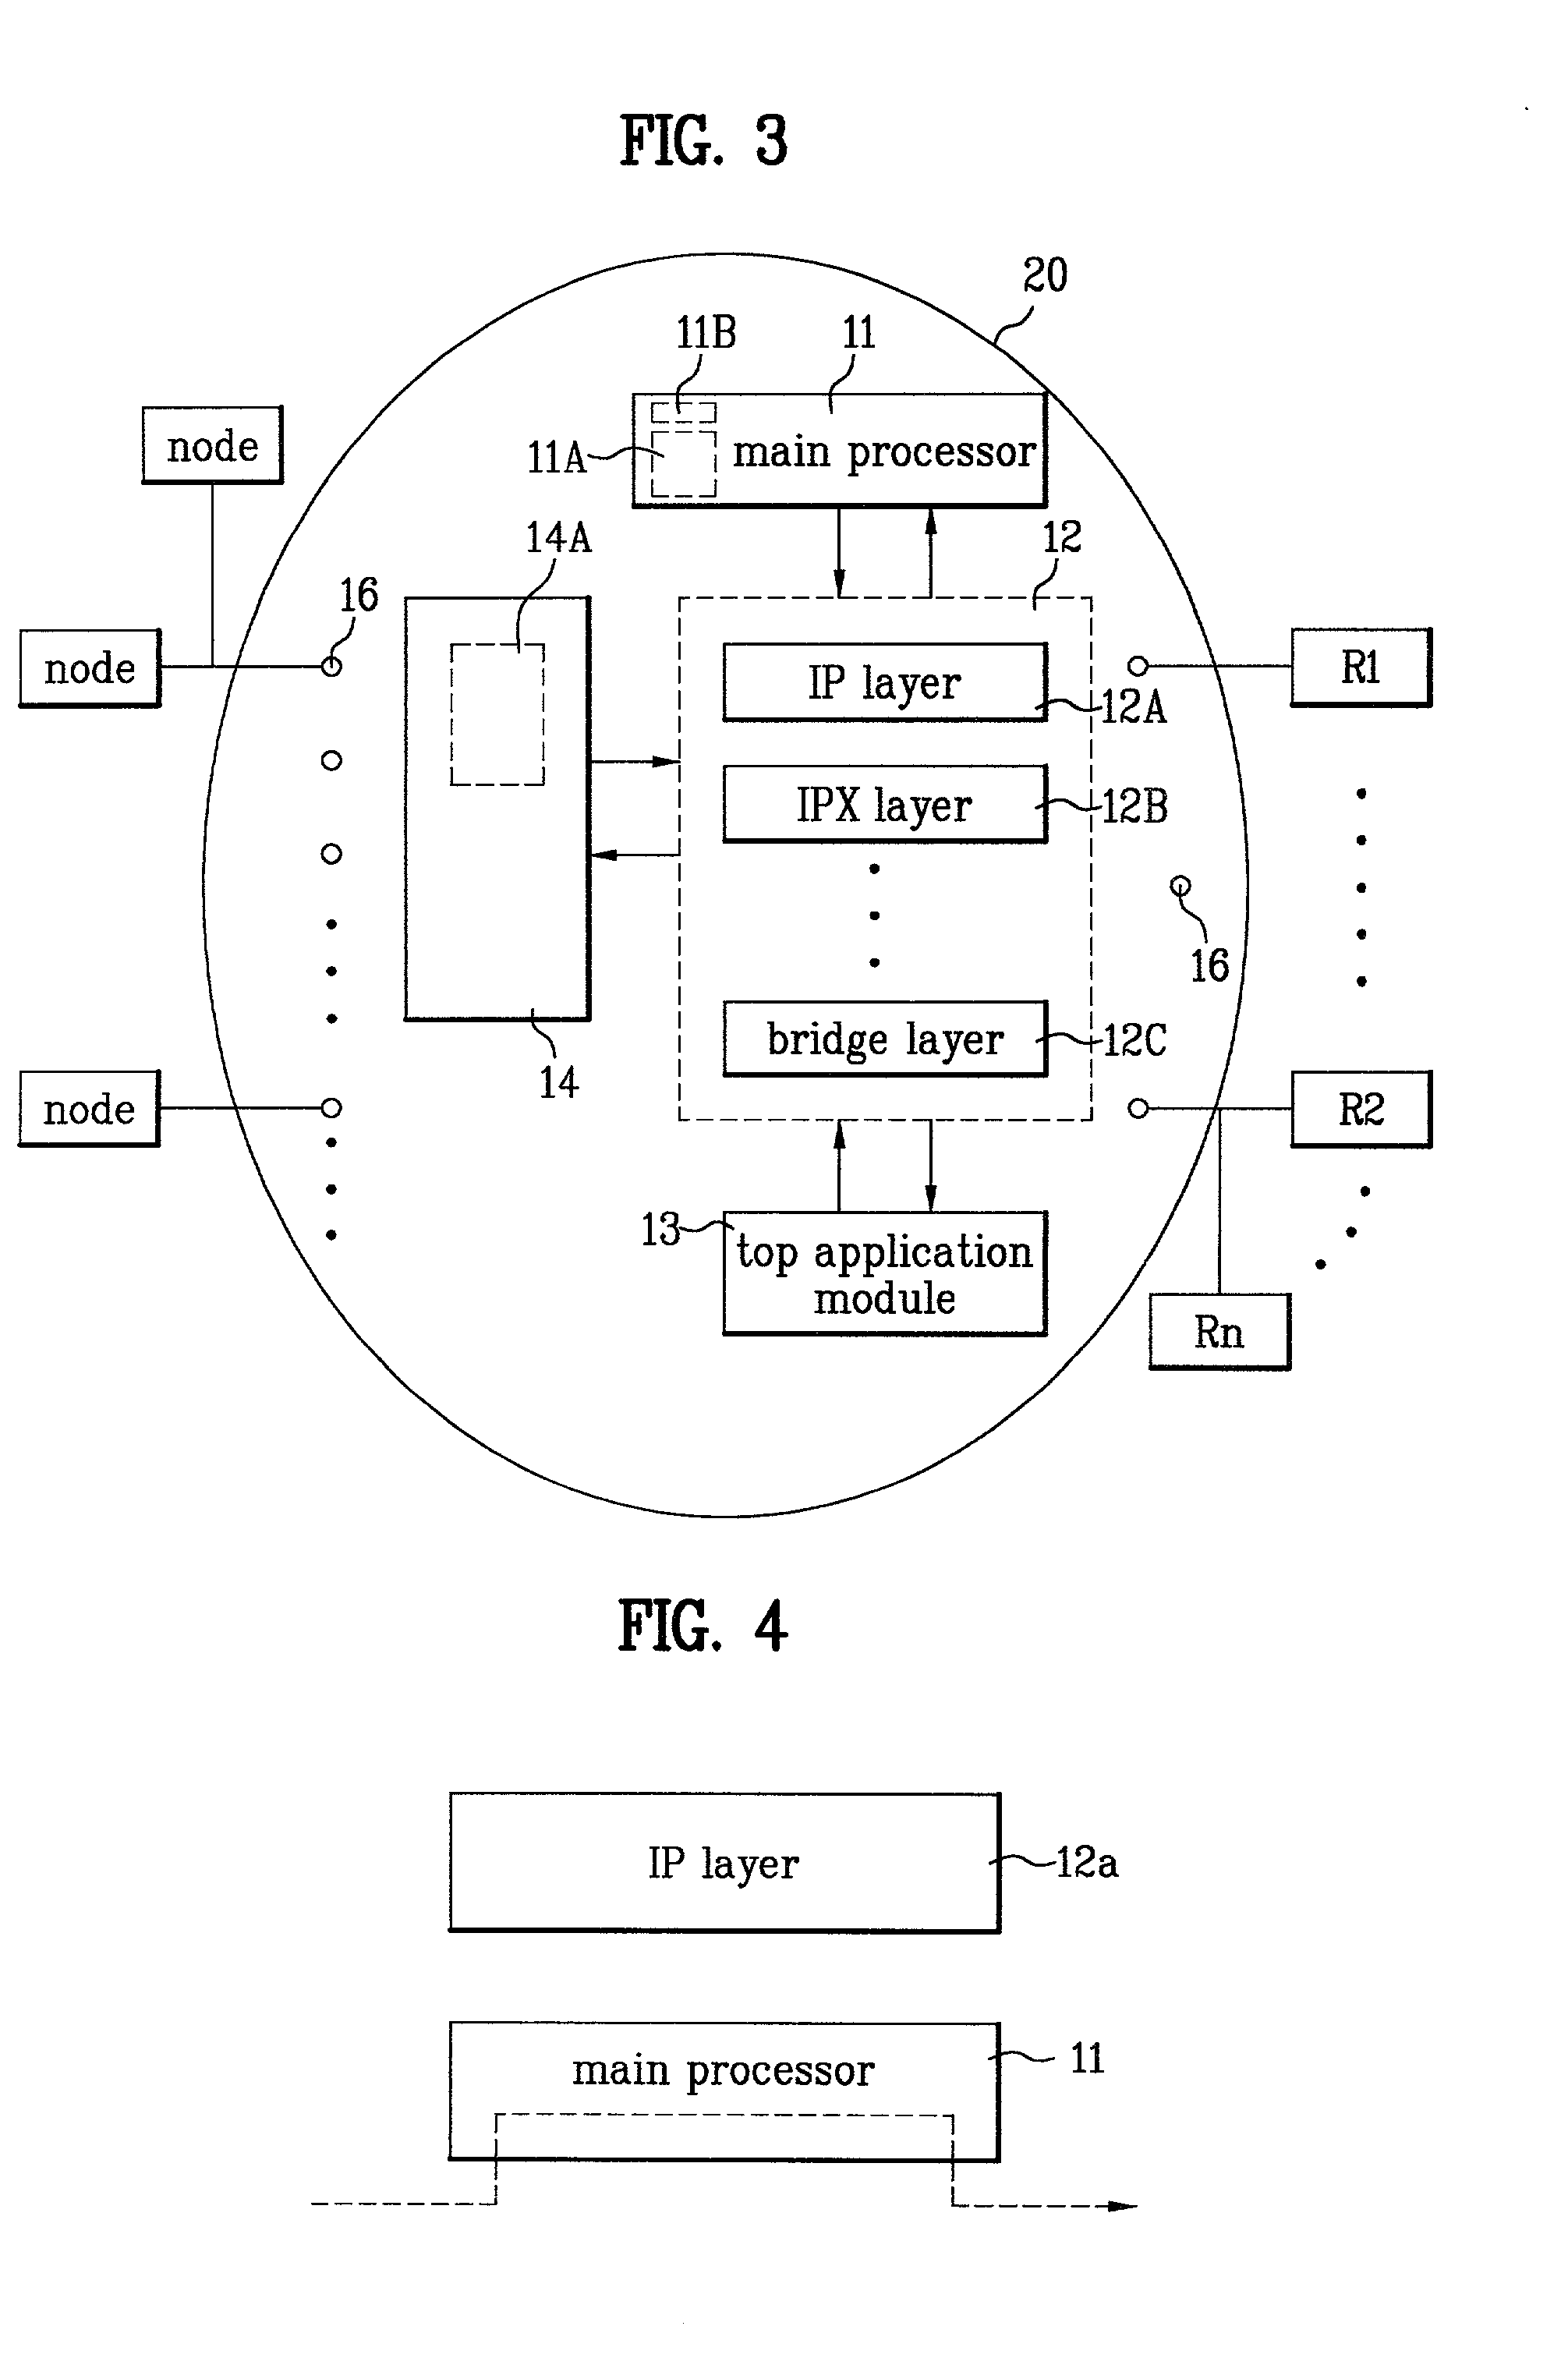 Method of routing a packet in a routing device